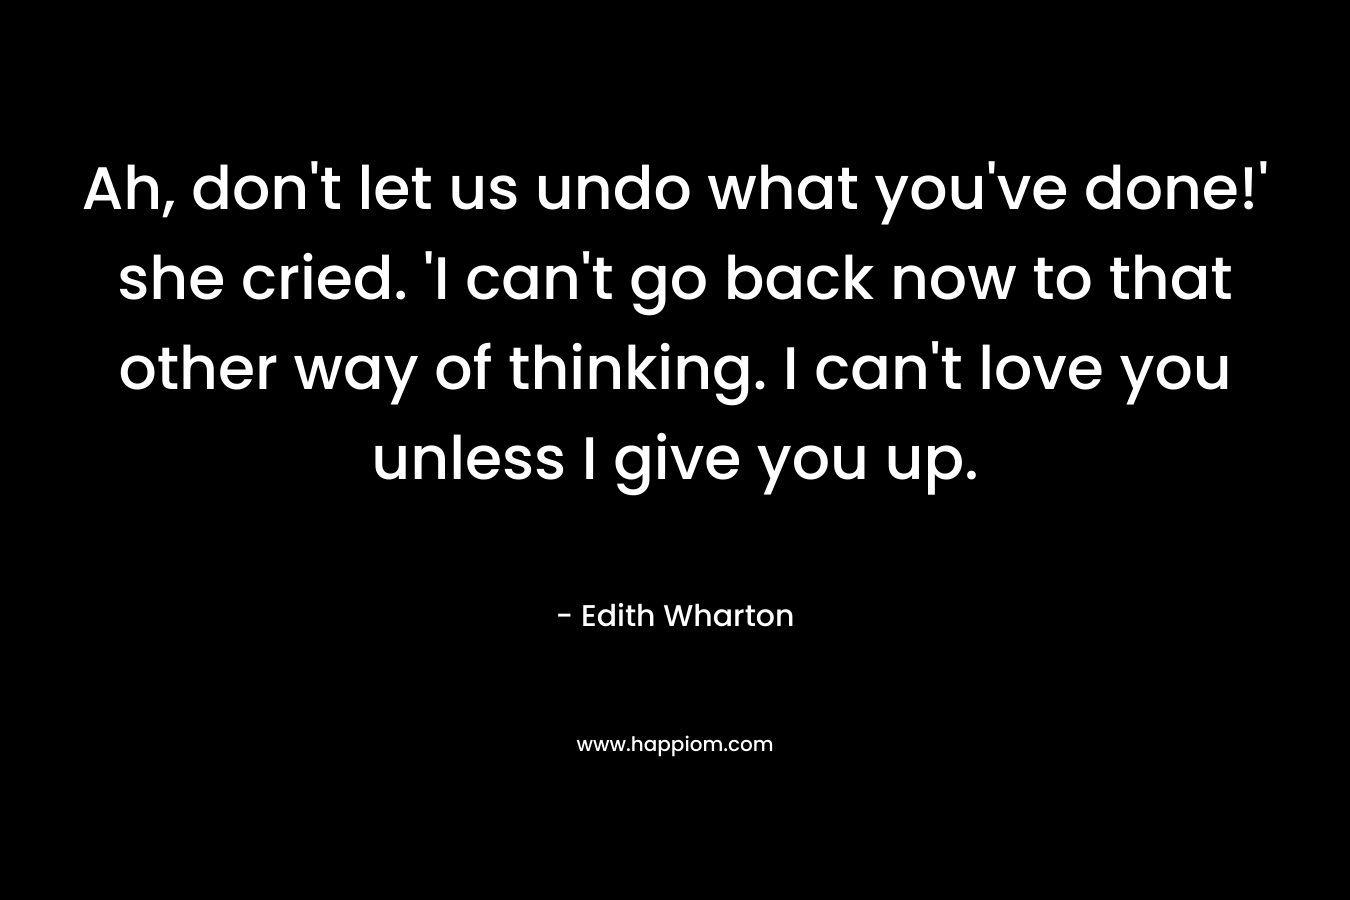 Ah, don’t let us undo what you’ve done!’ she cried. ‘I can’t go back now to that other way of thinking. I can’t love you unless I give you up. – Edith Wharton